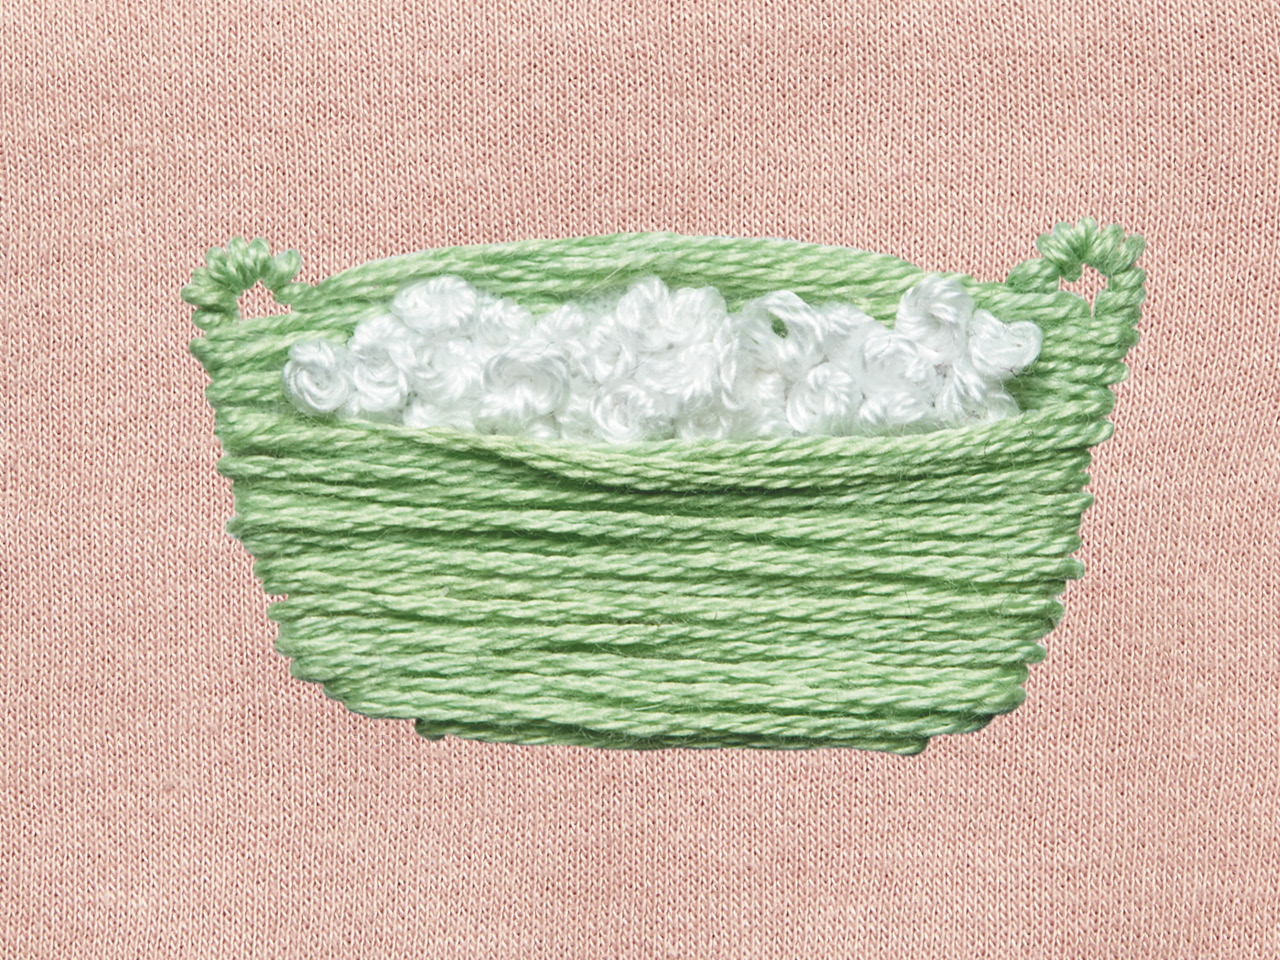 Green laundry basket embroidered with white foam on a pink cloth background